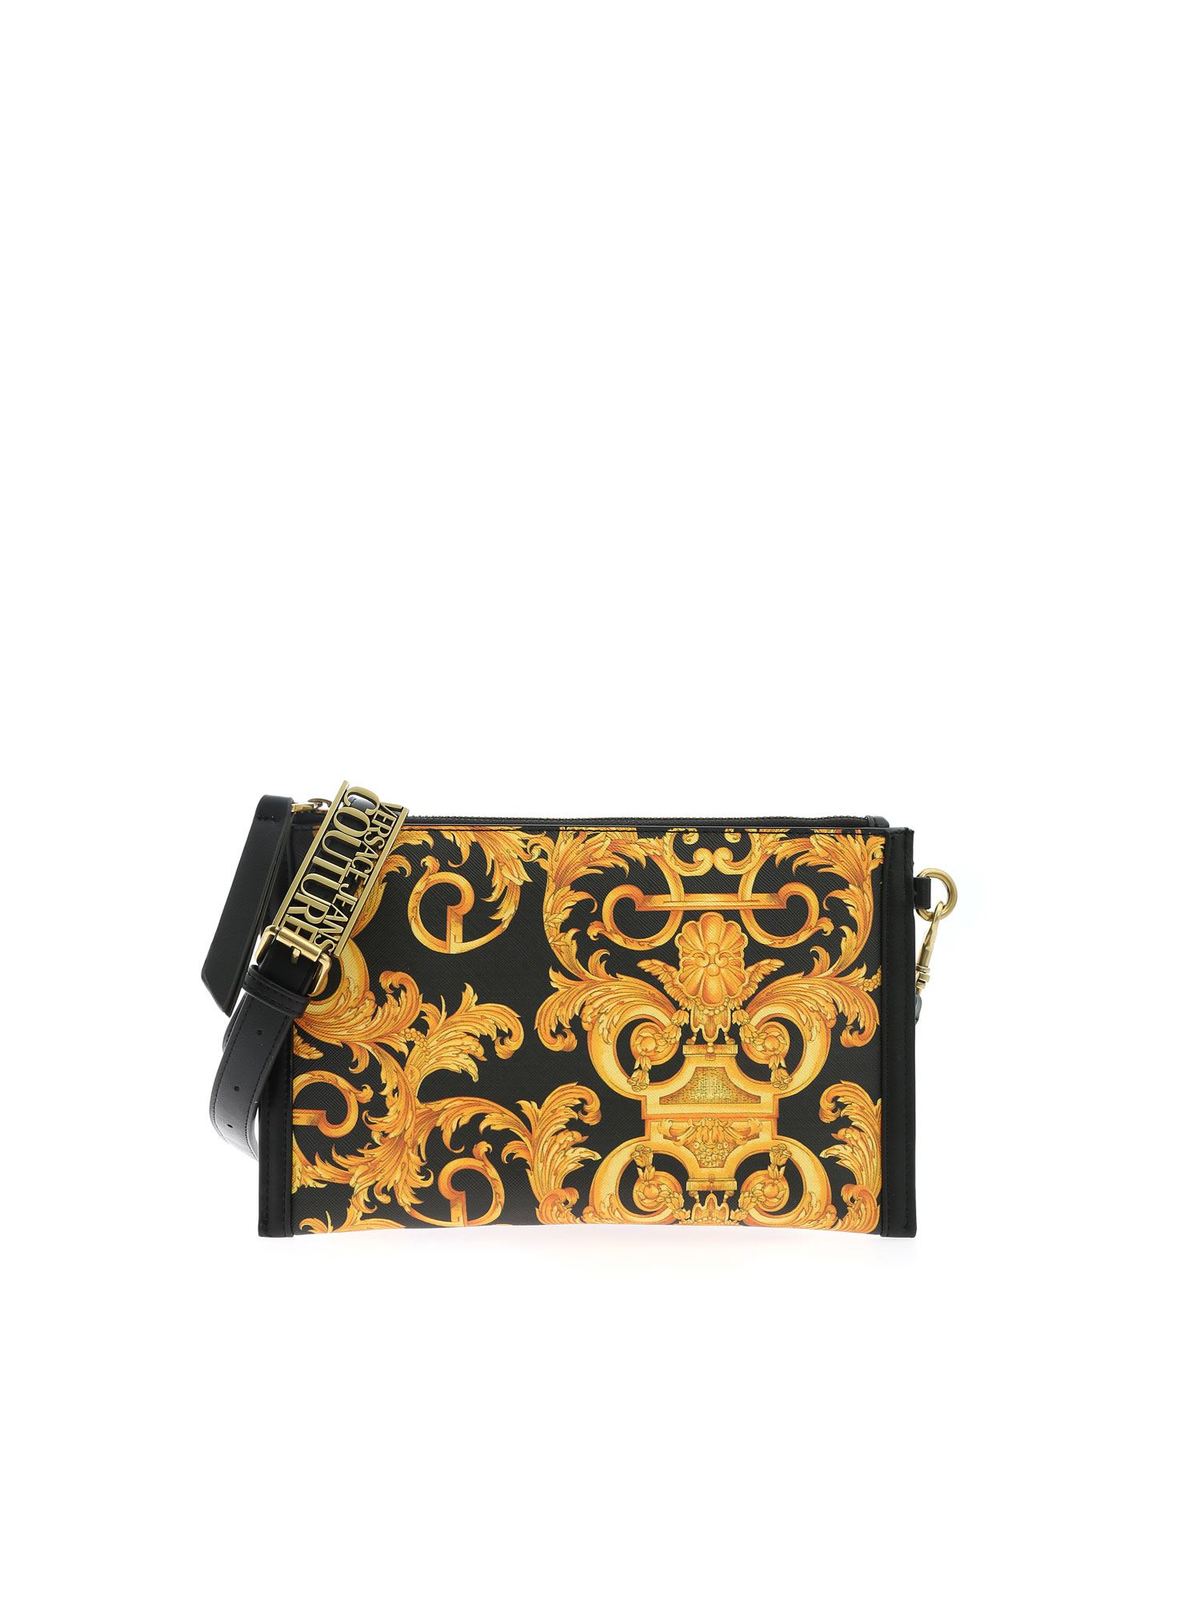 Versace Jeans Couture Baroque Clutch Bag In Black